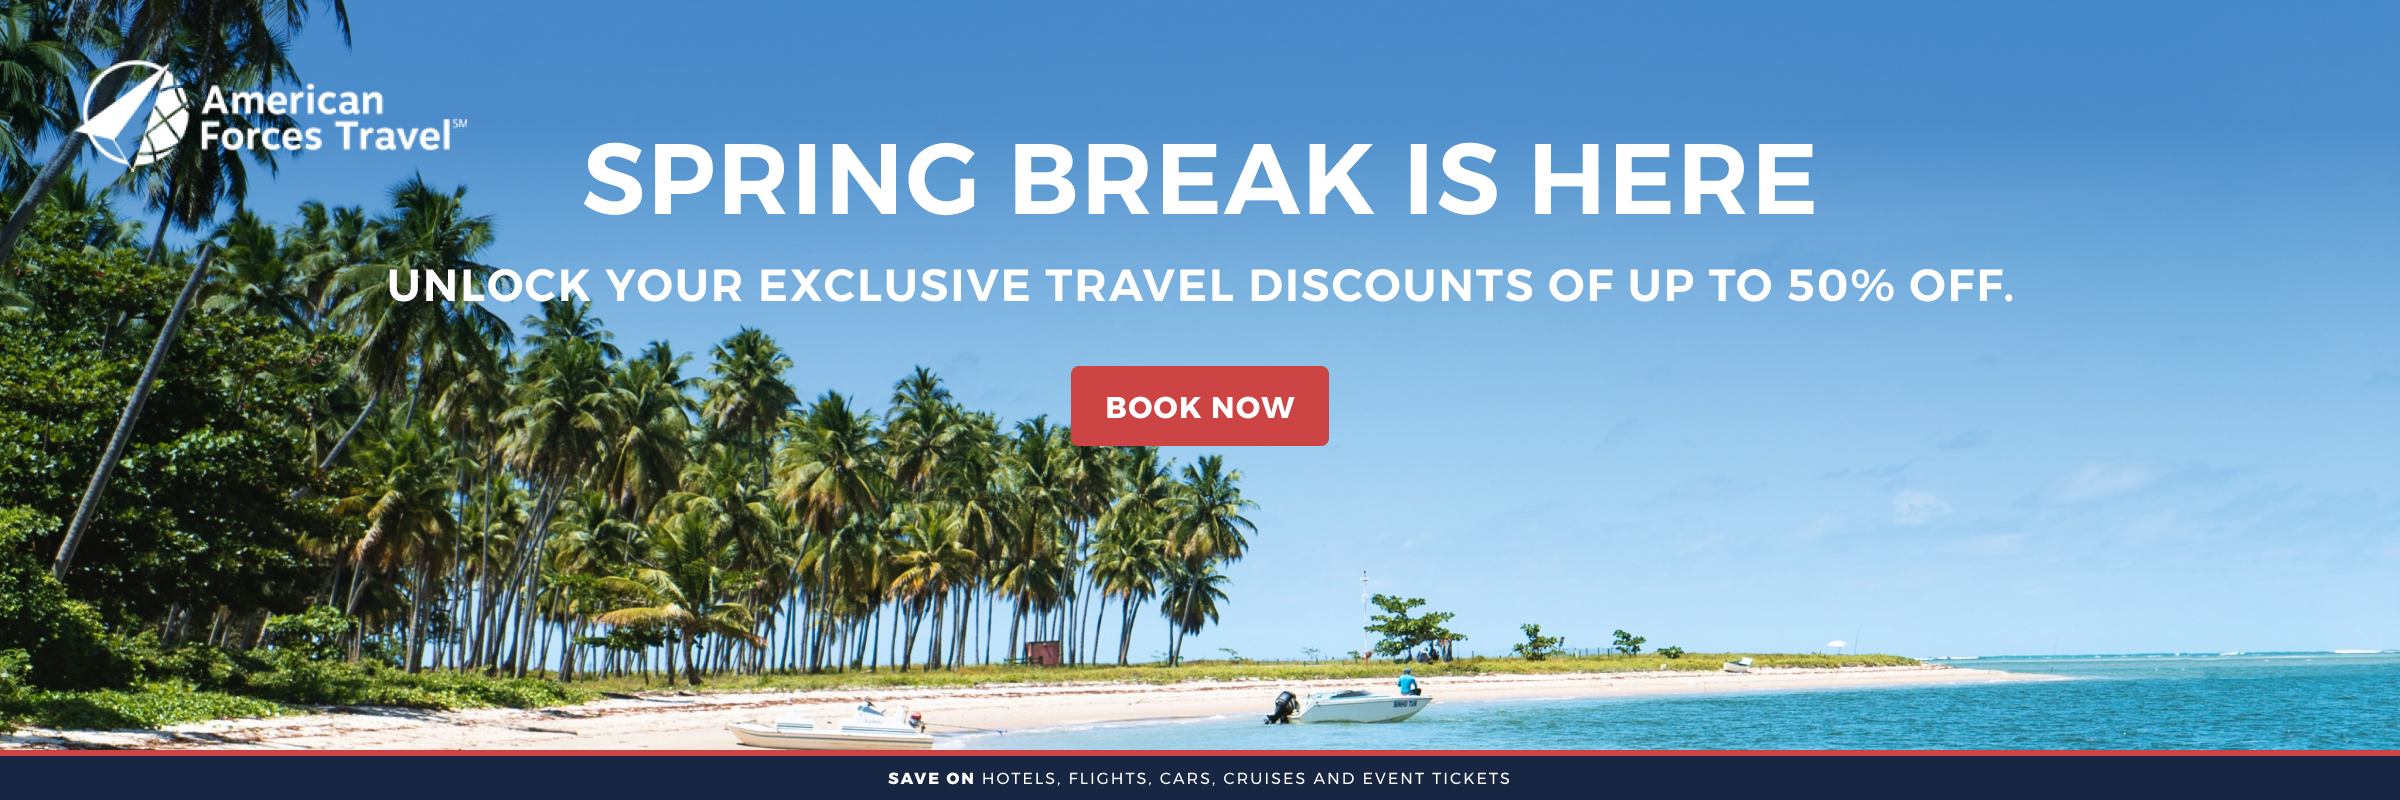 Ad for American Forces Travel. Images of a tropical beach. Spring break is here. Unlock your exclusive travel discounts of up to 50% off. Book Now.